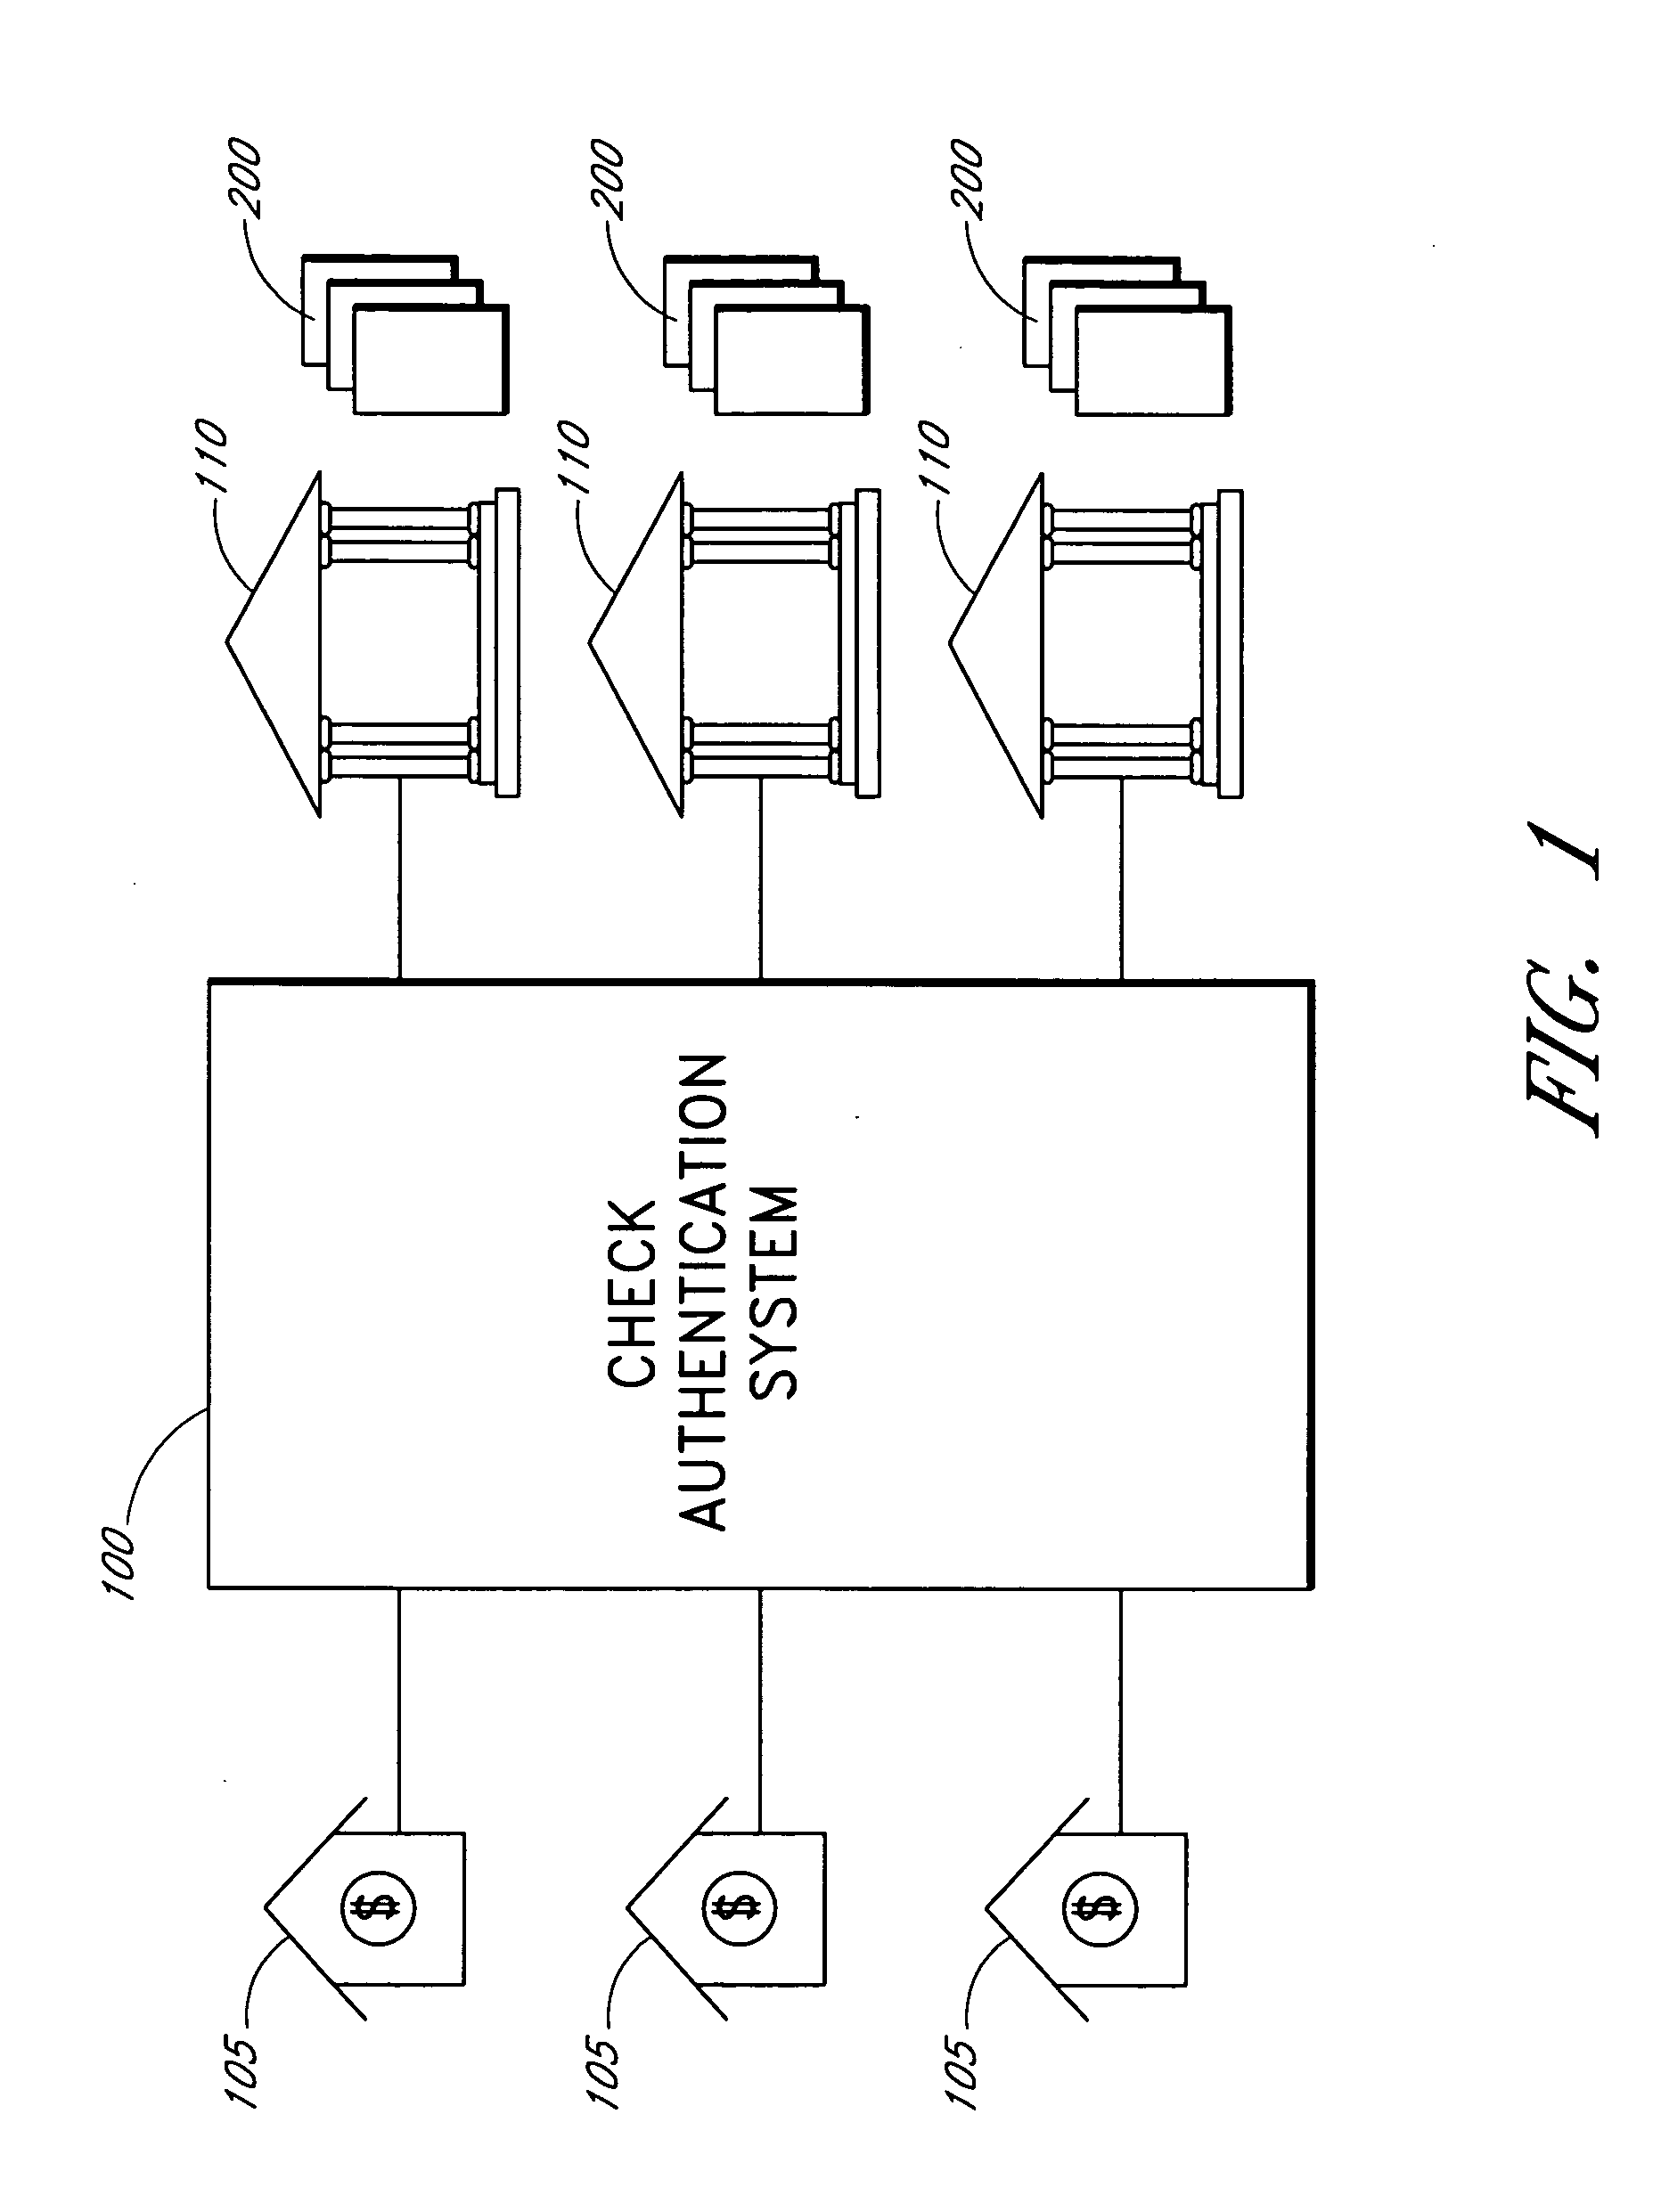 Systems and methods for routing requests for reconcilement information